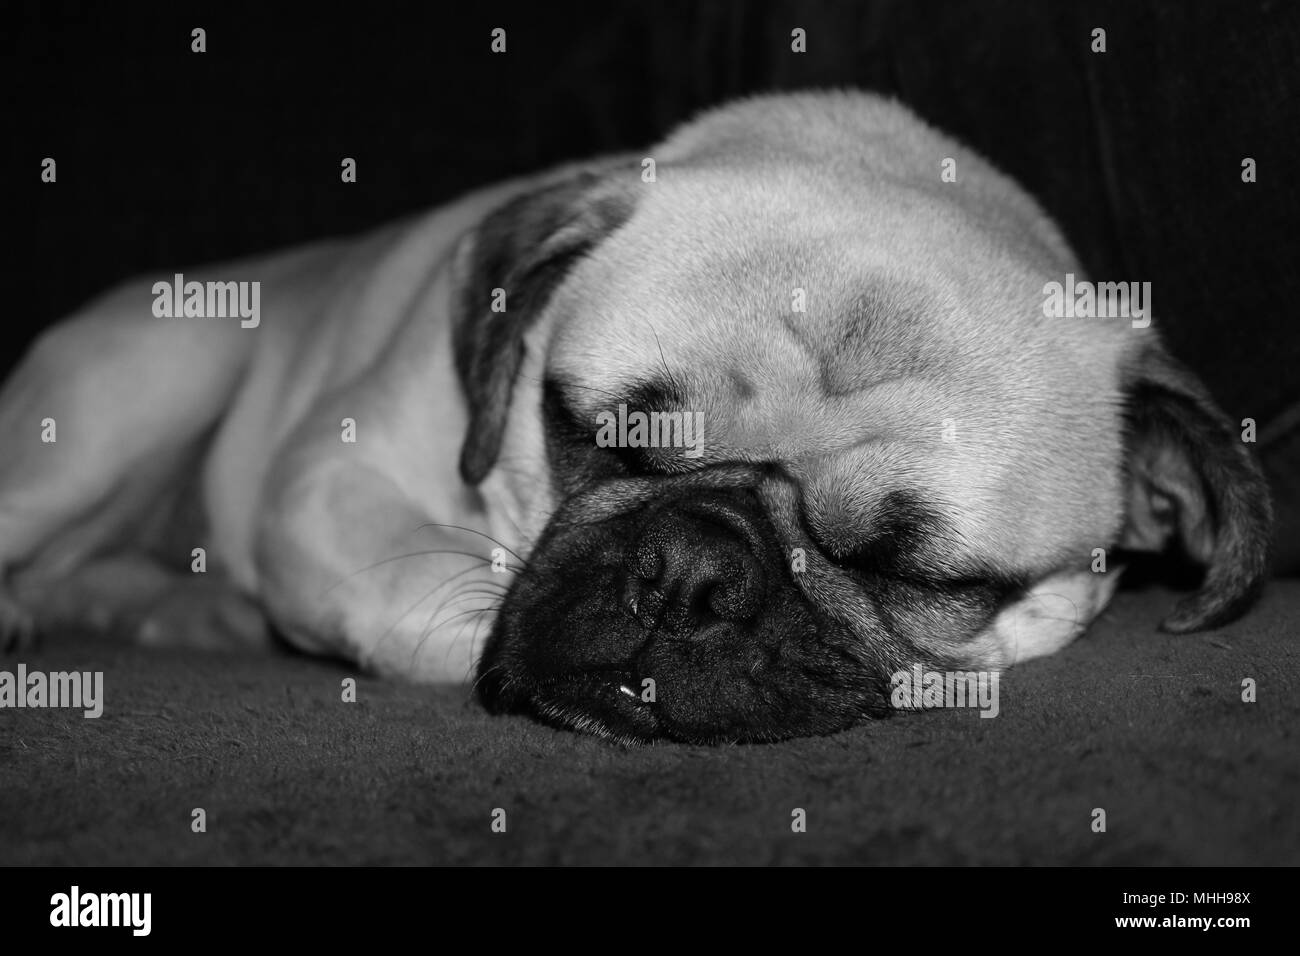 Black and white photo of a one year old male Pug dog asleep. Stock Photo